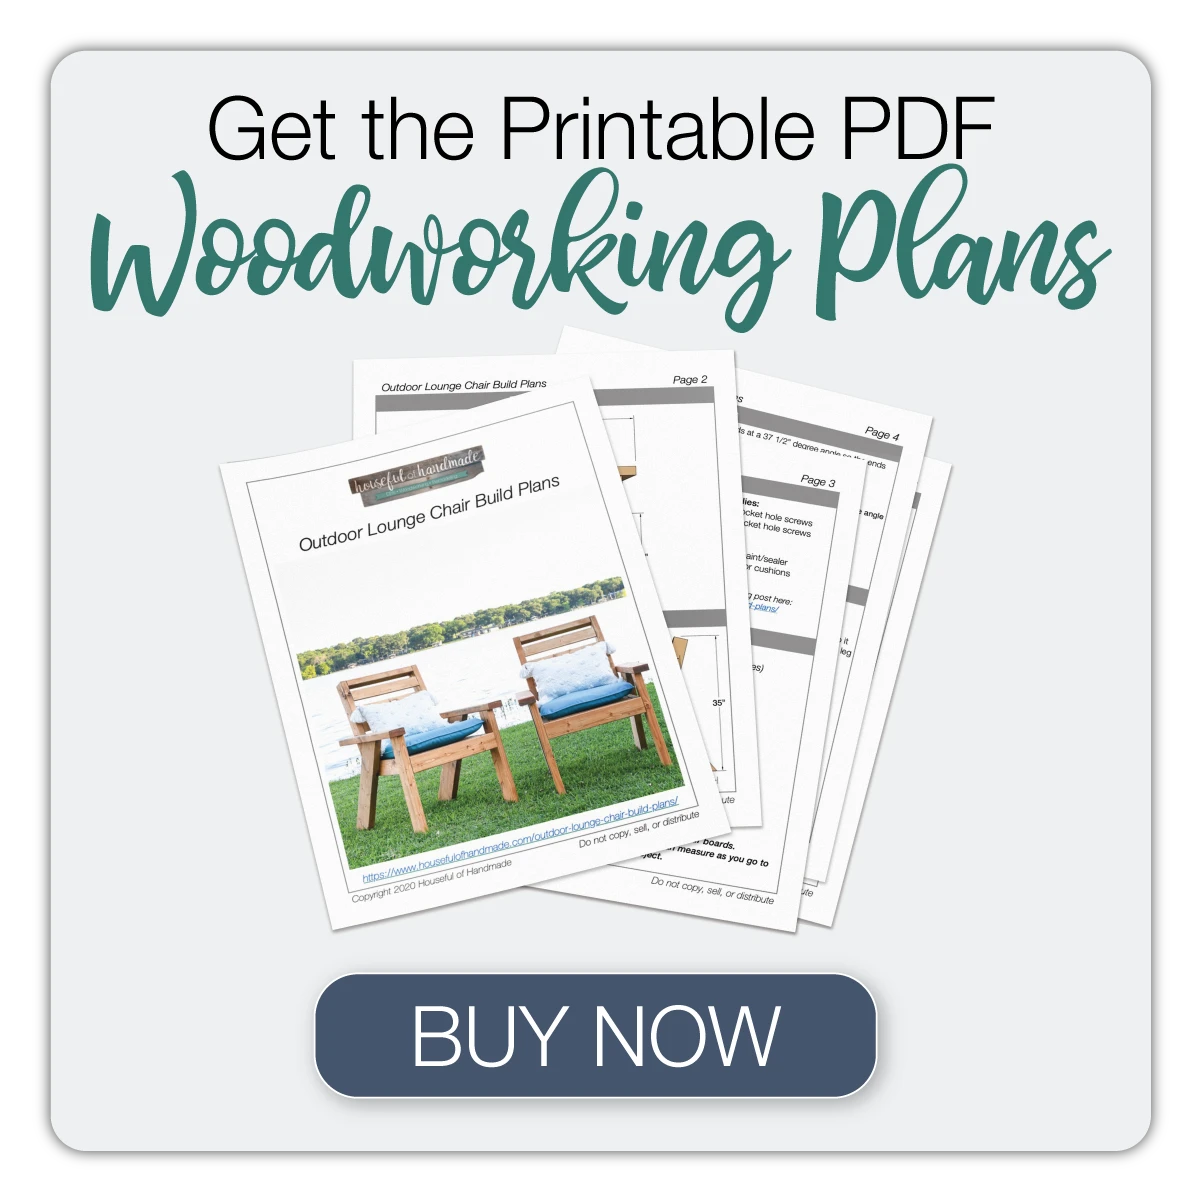 Button to buy the printable PDF woodworking plans for the outdoor chair.